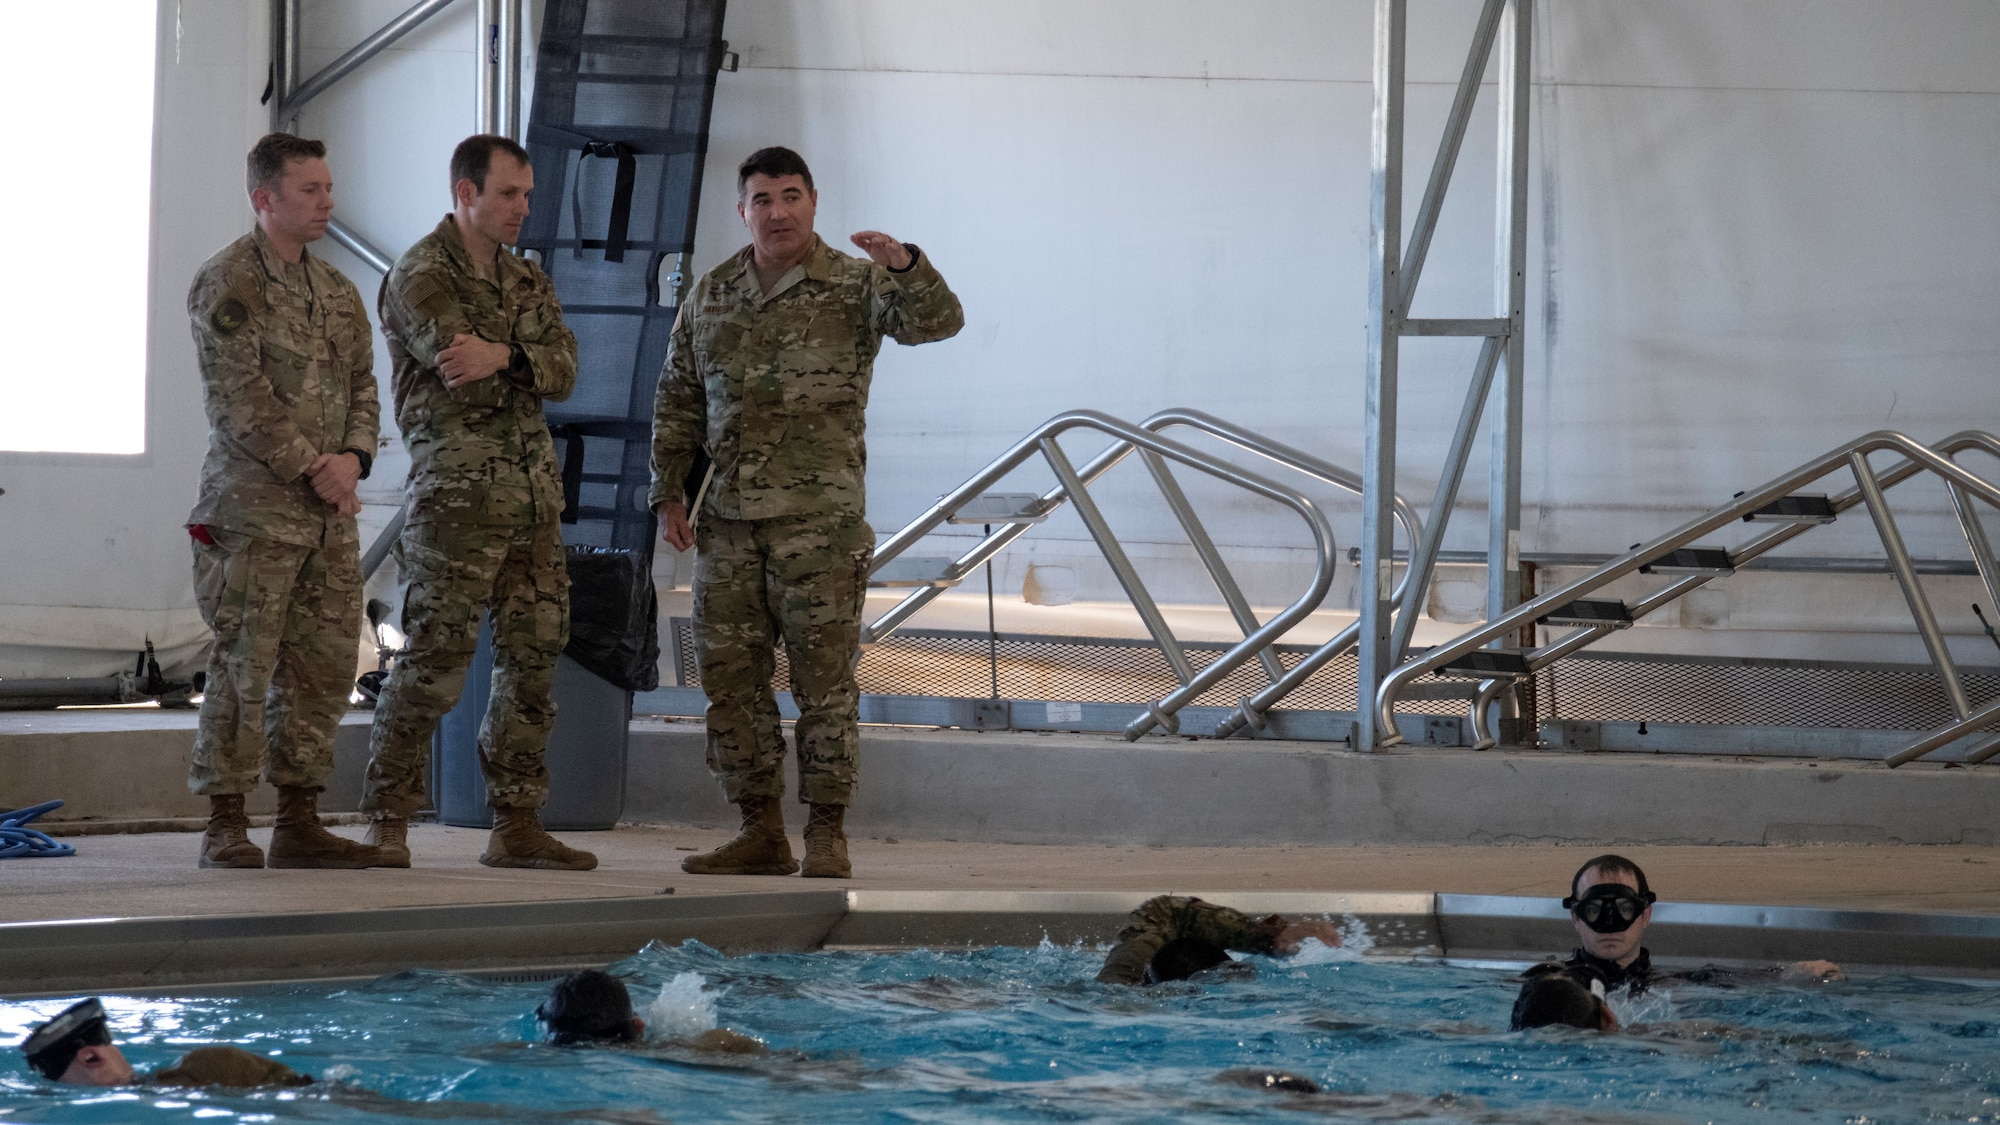 U.S. Air Force Maj. Gen. Matthew Davidson (right), Air Force Special Operations Command director of operations, observes Assessment and Selection at Chaparral Pool on Joint Base San Antonio-Lackland, Texas, Mar. 15, 2022. One third of graduates from the Special Warfare Training Wing pipelines will feed directly into operational AFSOC units, to include Combat Controllers, Special Reconnaissance Airmen, Special Tactics Officers, and some Pararescuemen.